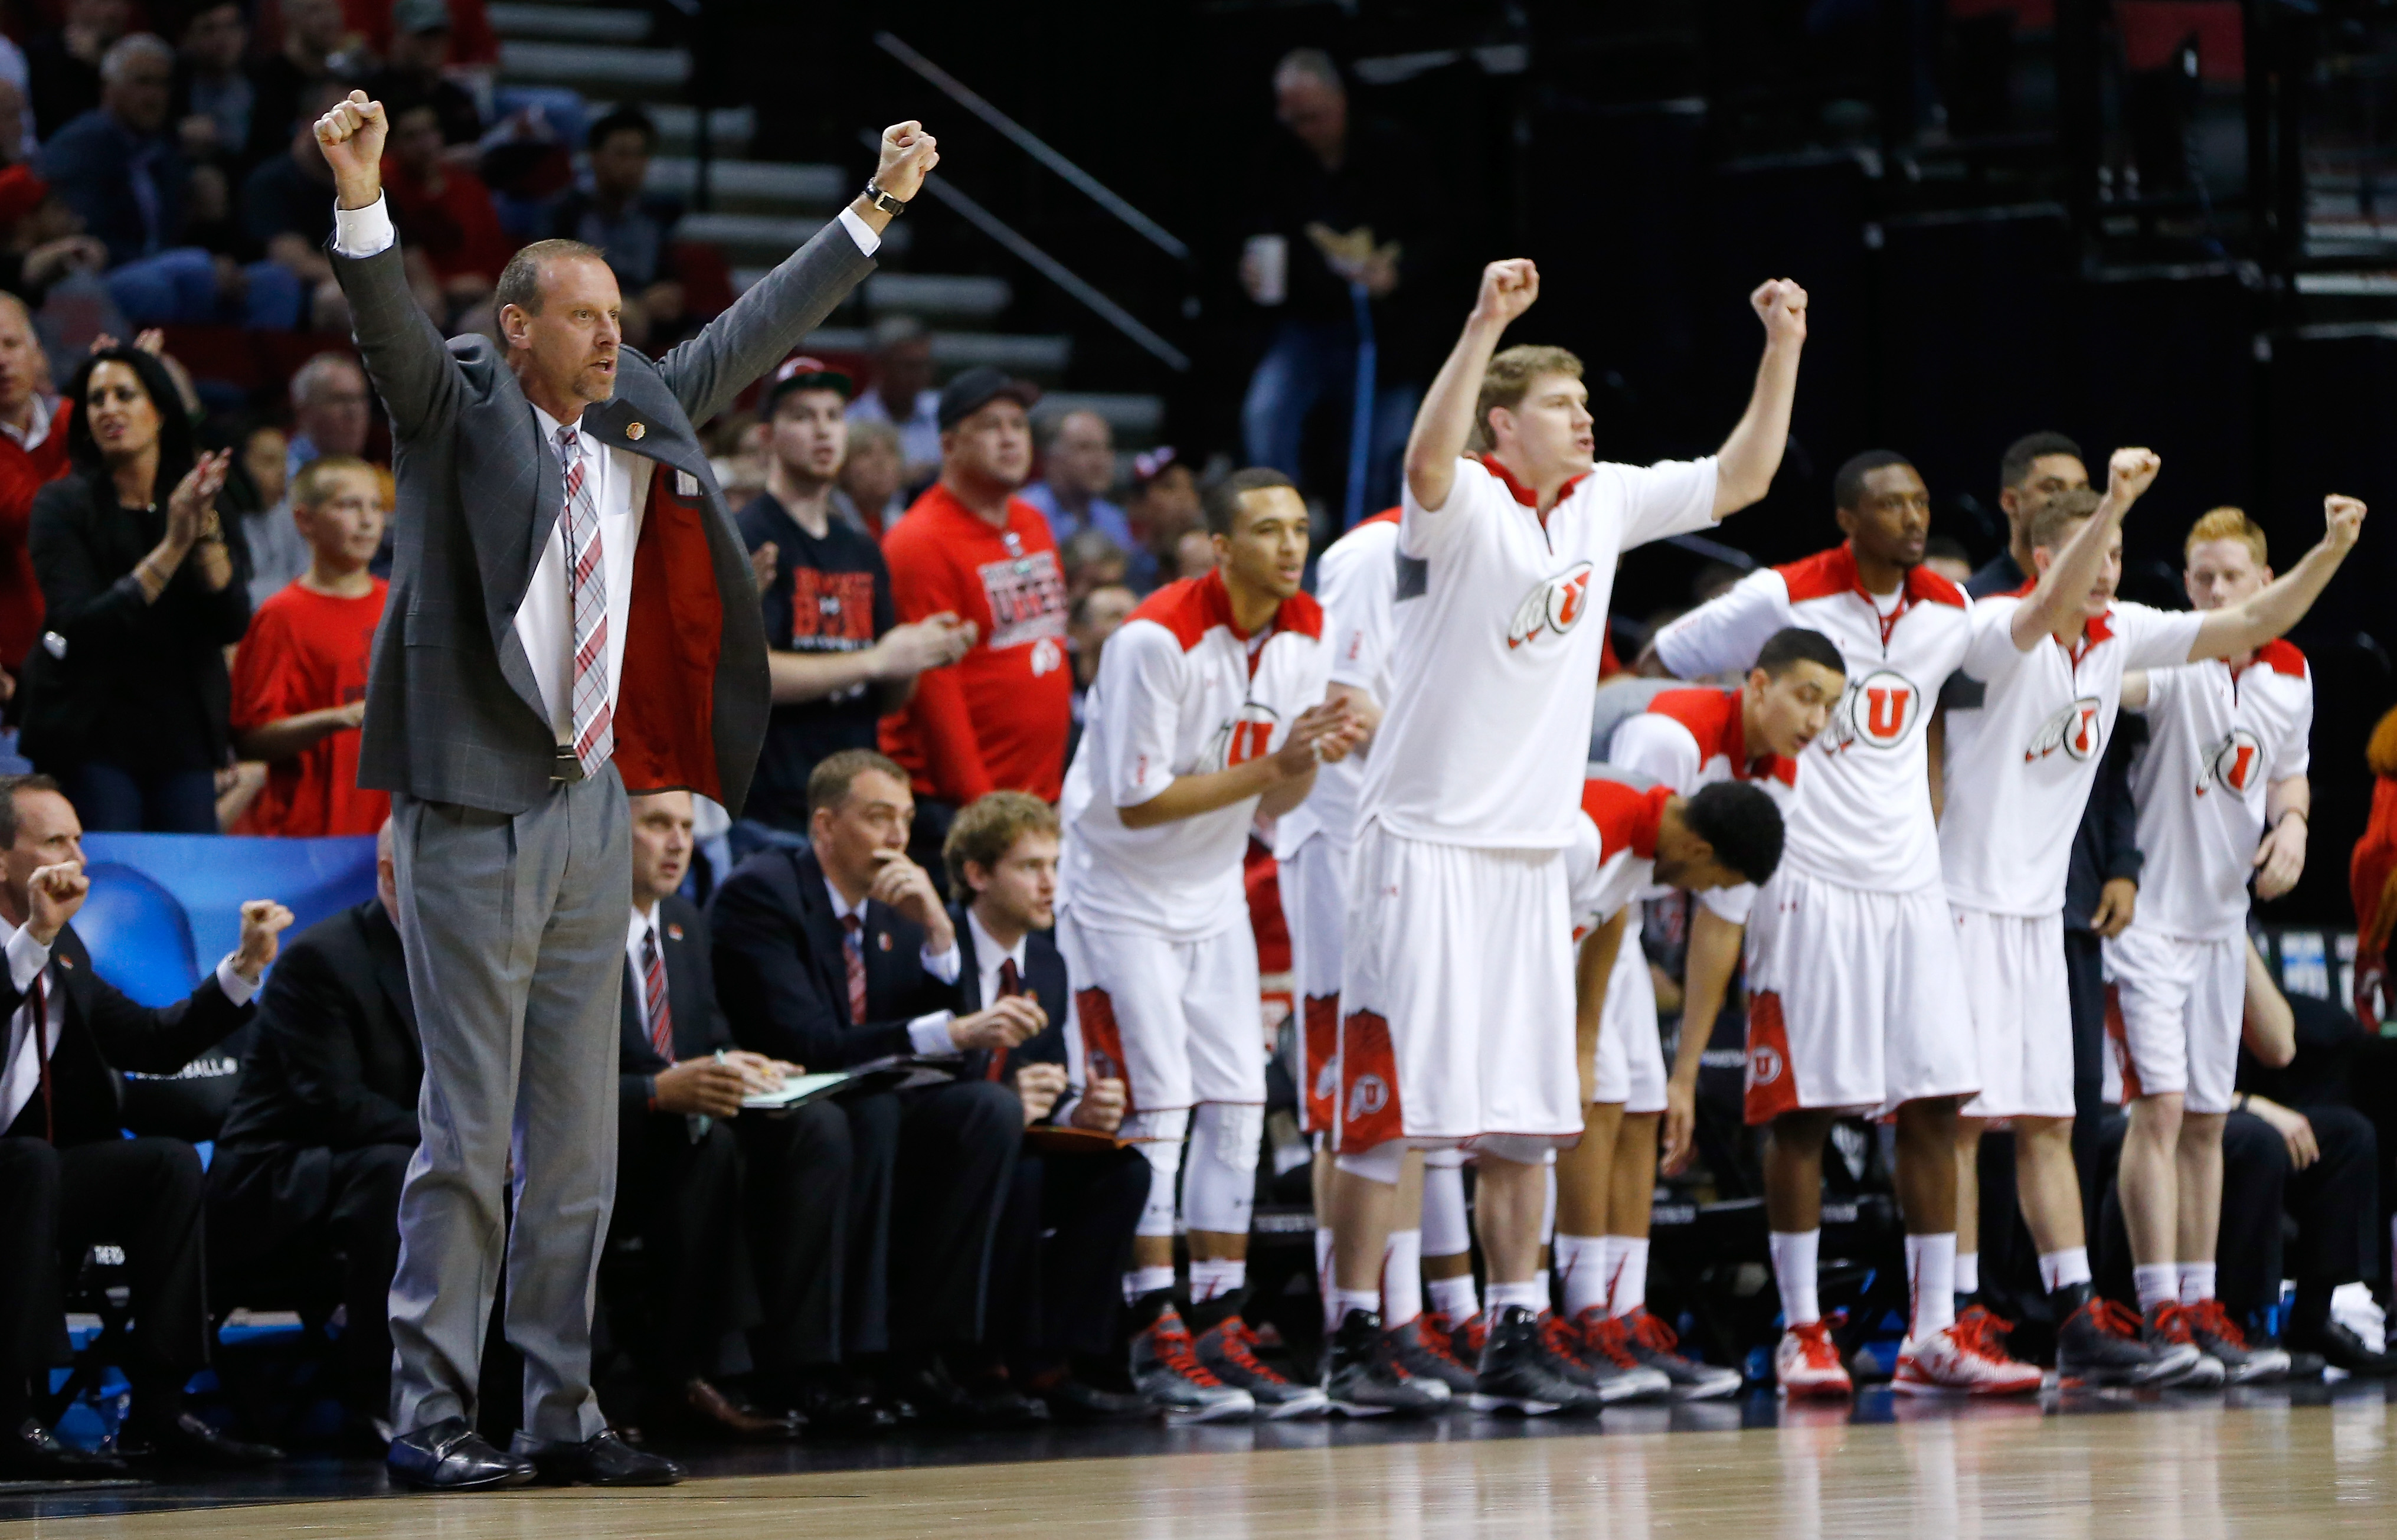 Utah's bench celebrates after a made shot. (Getty)